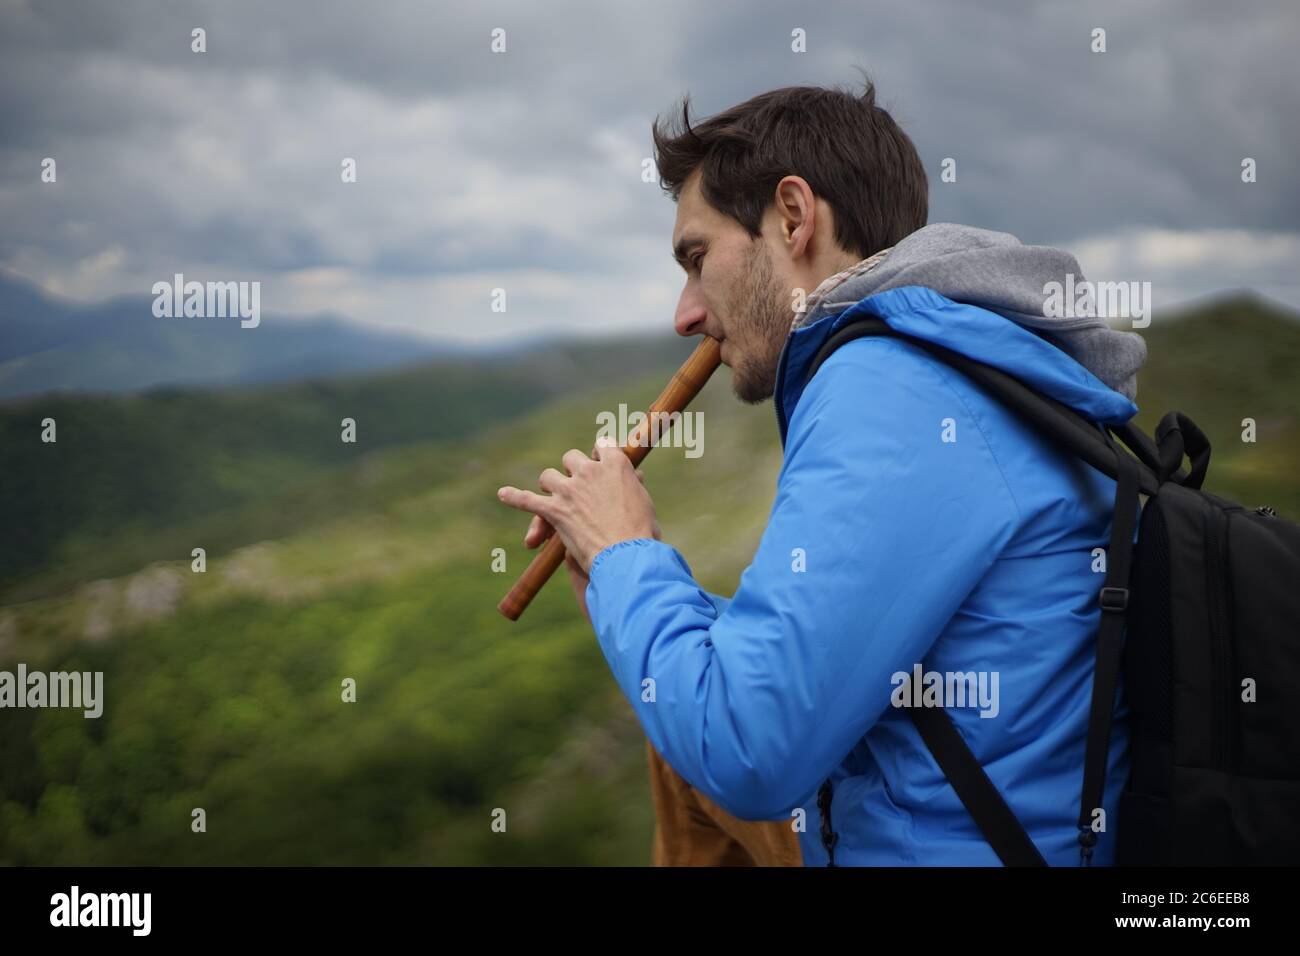 A side view of a young male tourist playing a wooden reed-pipe/ flute. He is on the summit of Stara Planina (Balkan Mountains). Stock Photo